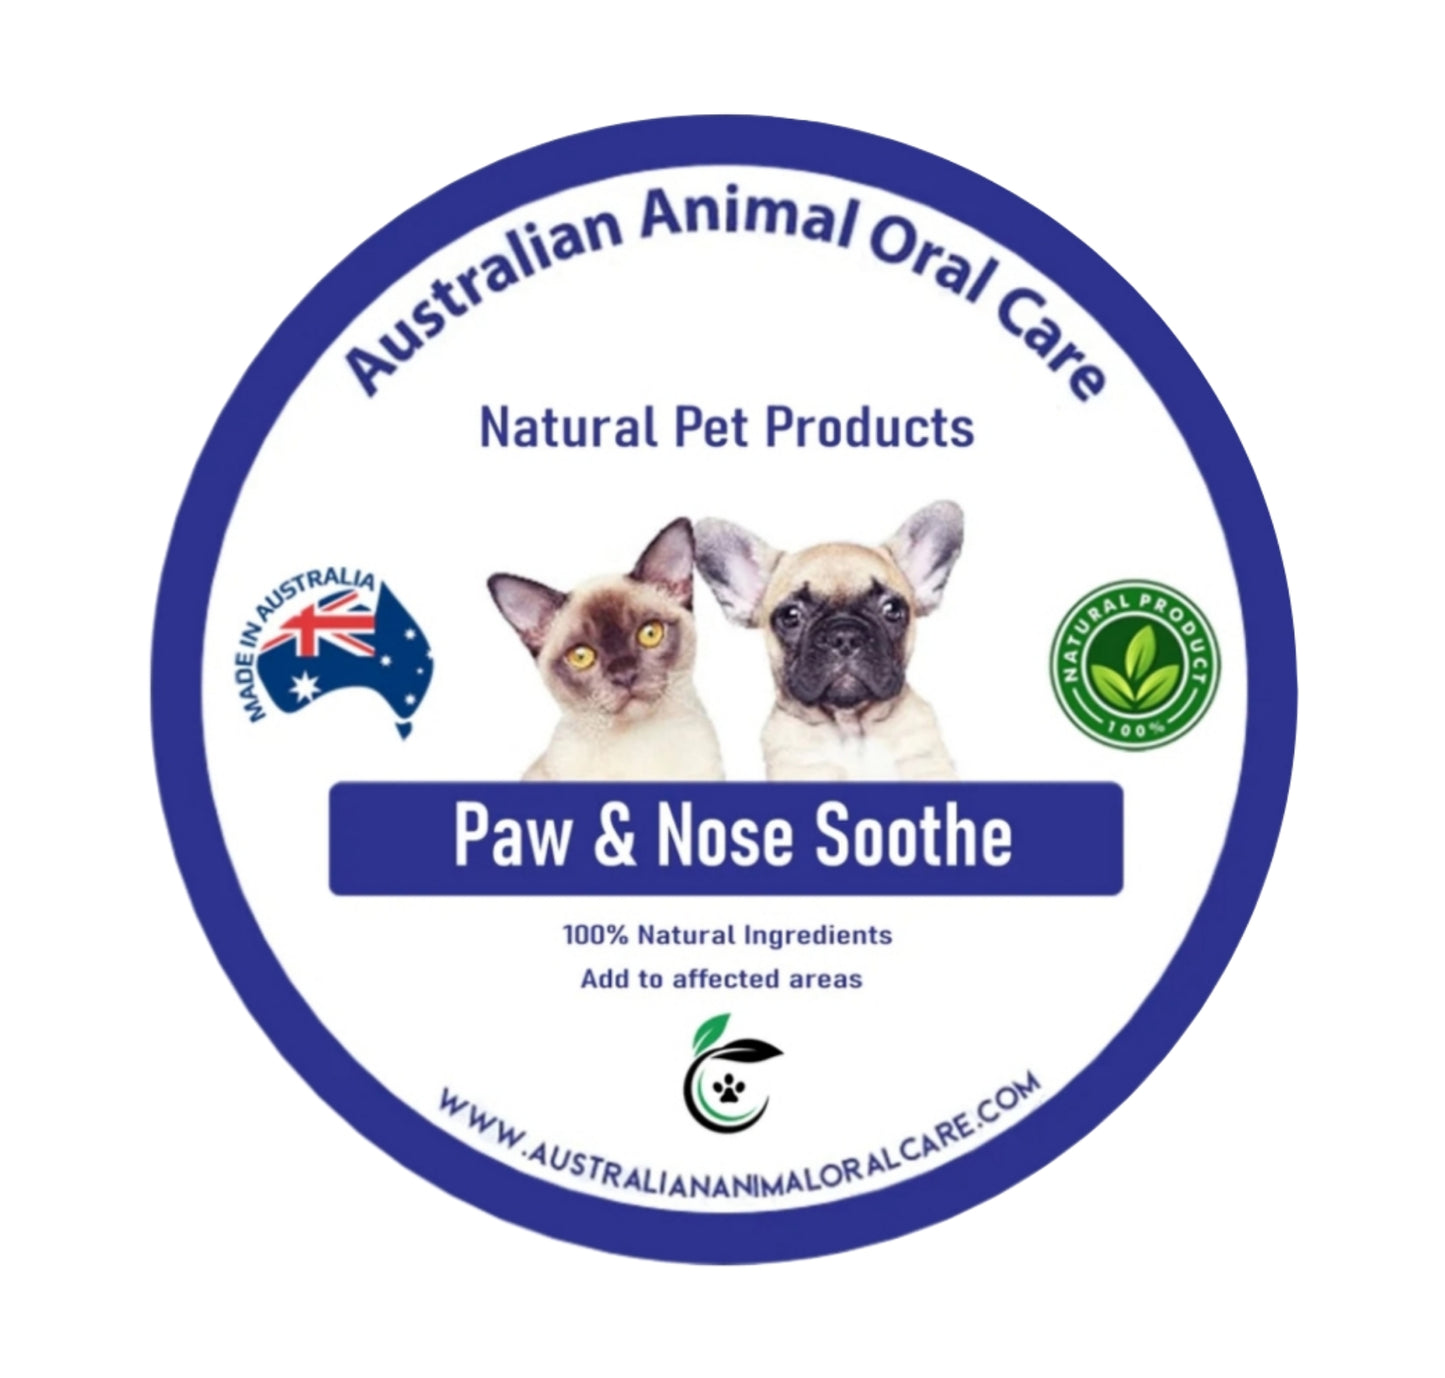 Paw & Nose Soothe